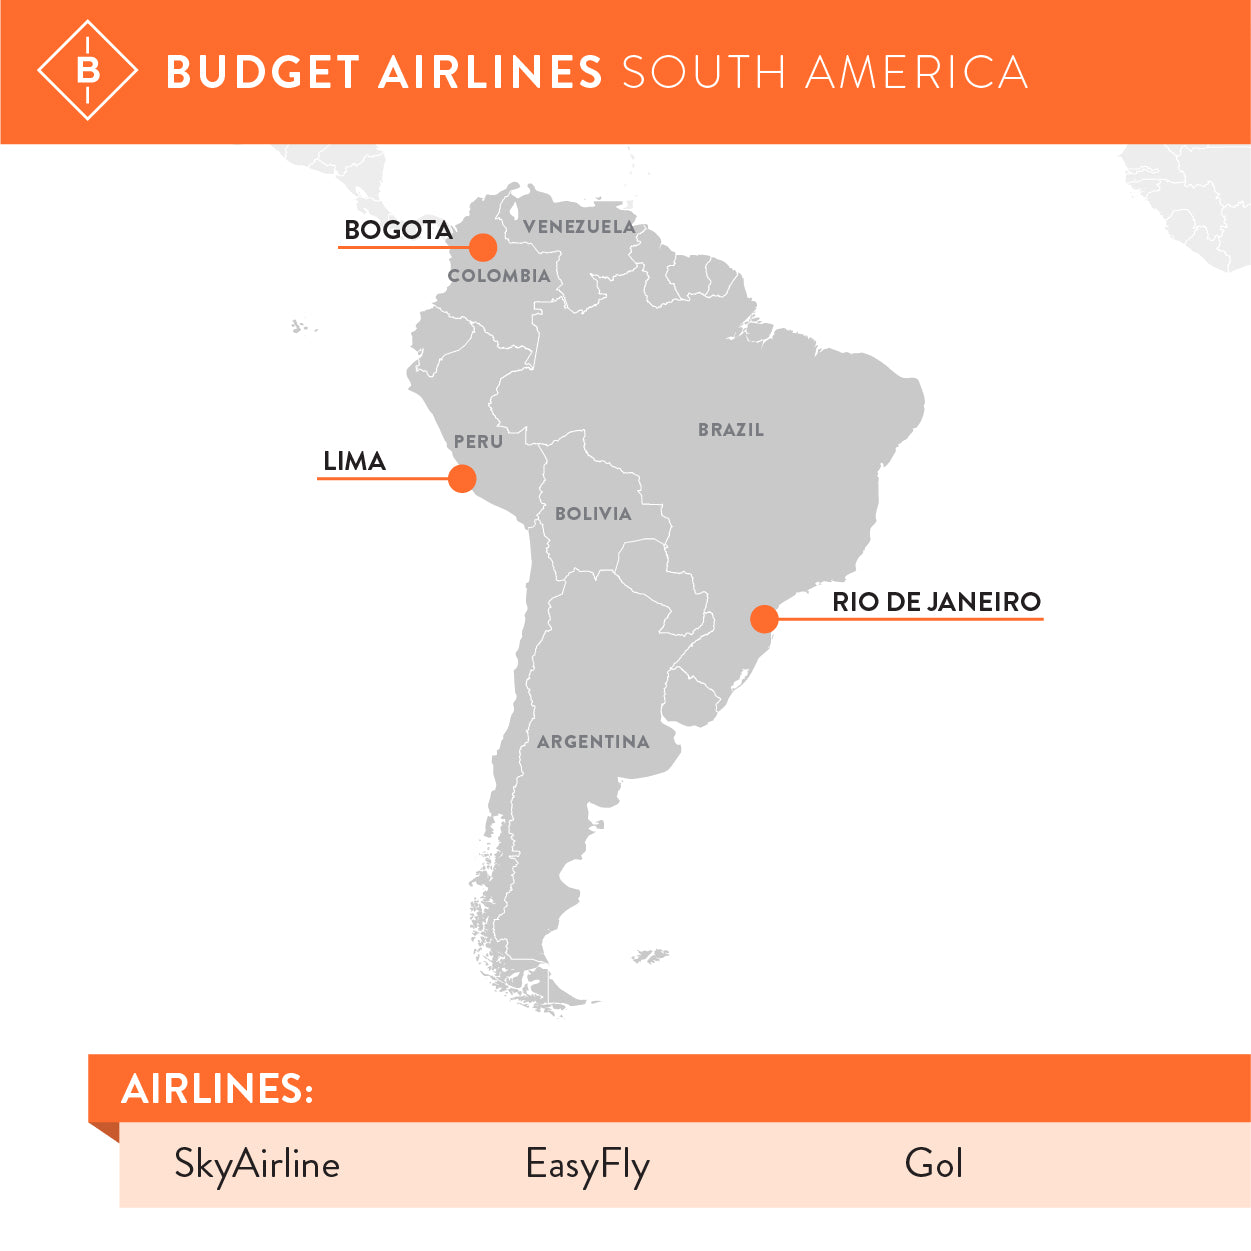 Low cost airline carriers in South America.